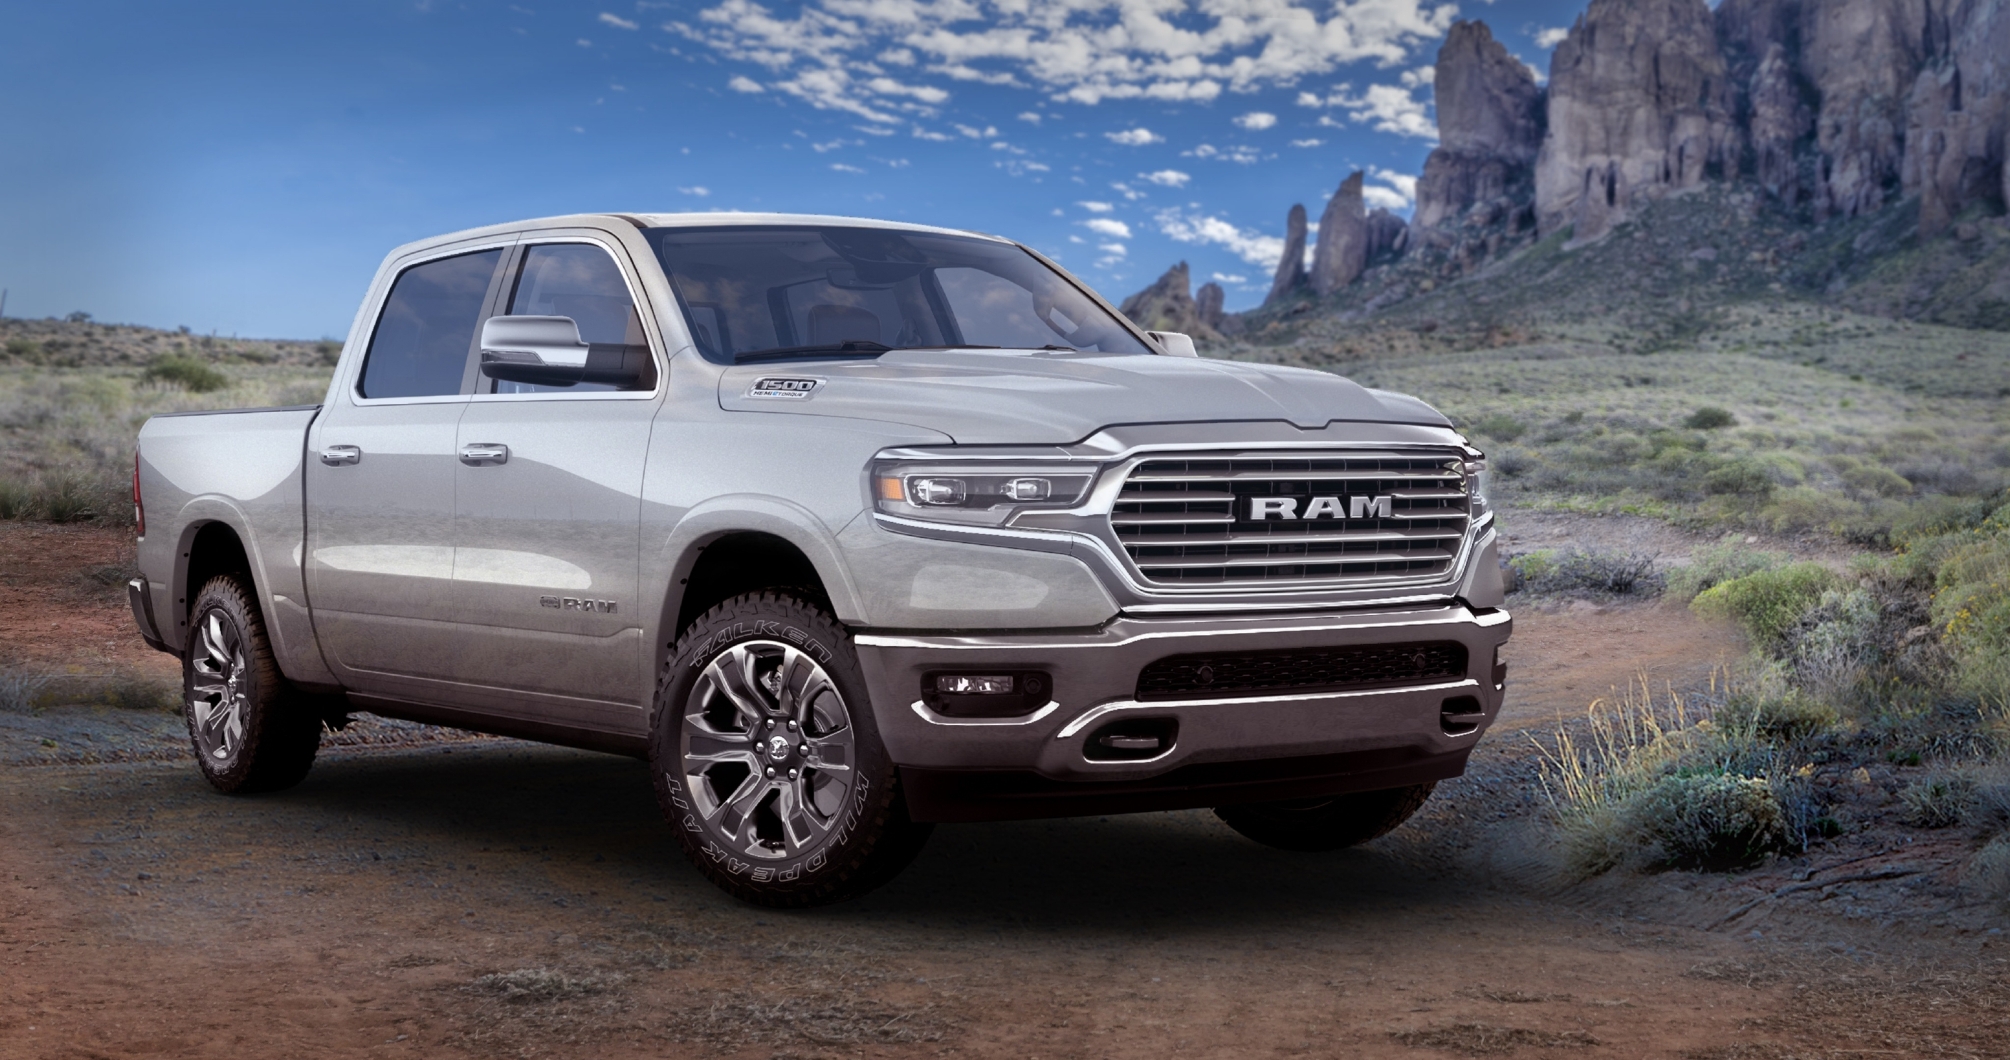 Ram Commemorates the Pinnacle of Southwest-inspired Luxury by Unveiling the New 2021 Ram 1500 Limited Longhorn 10th Anniversary Edition